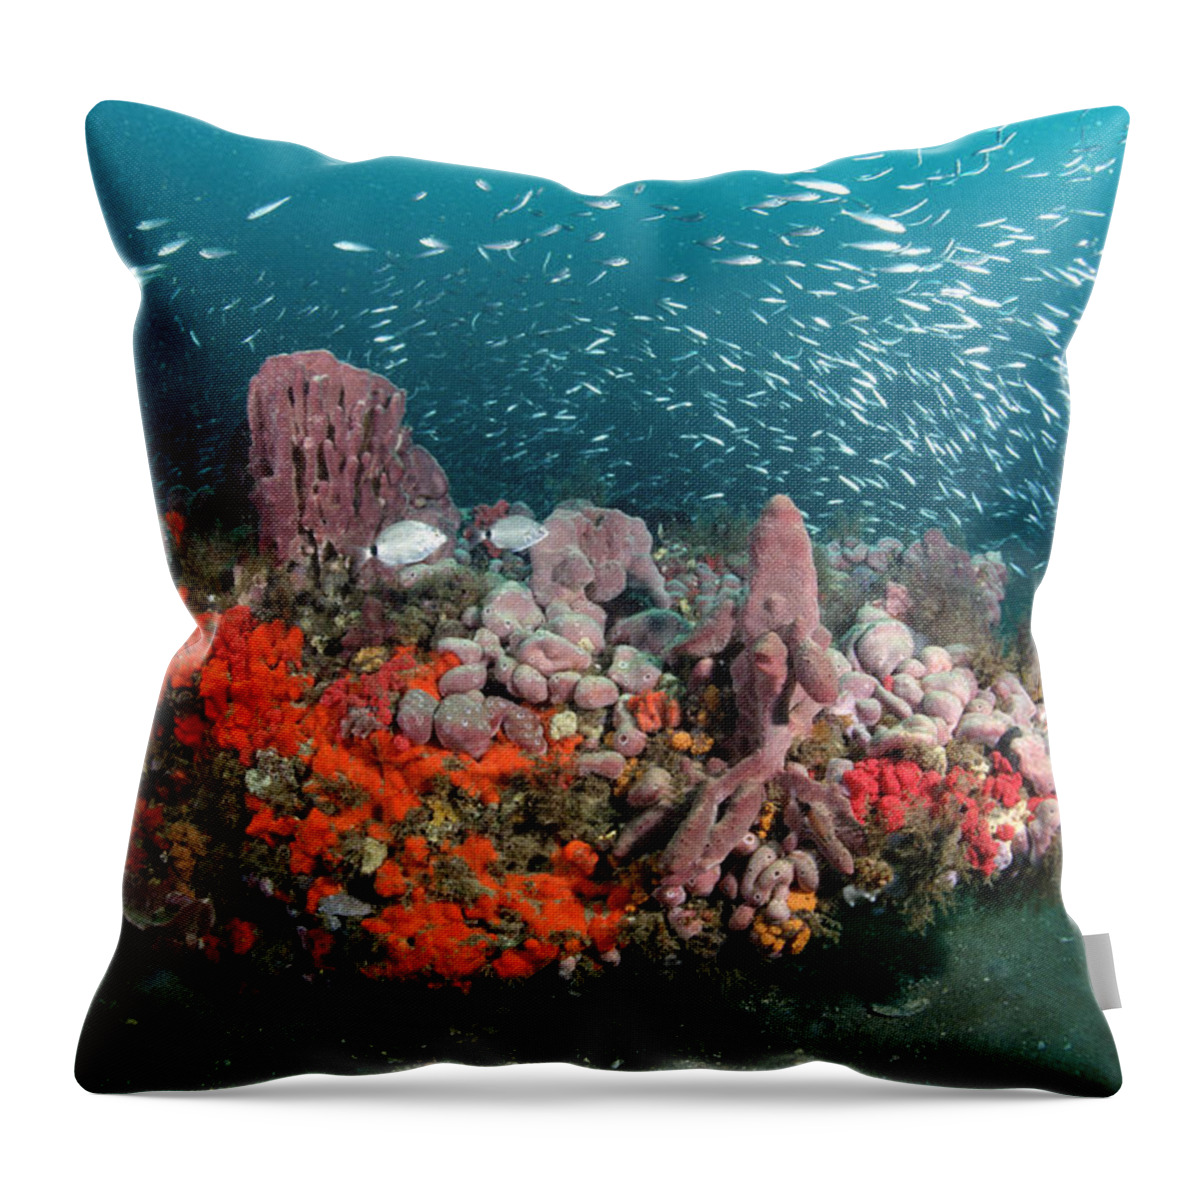 00126196 Throw Pillow featuring the photograph Coral And Schooling Fish Grays Reef Nms #1 by Flip Nicklin